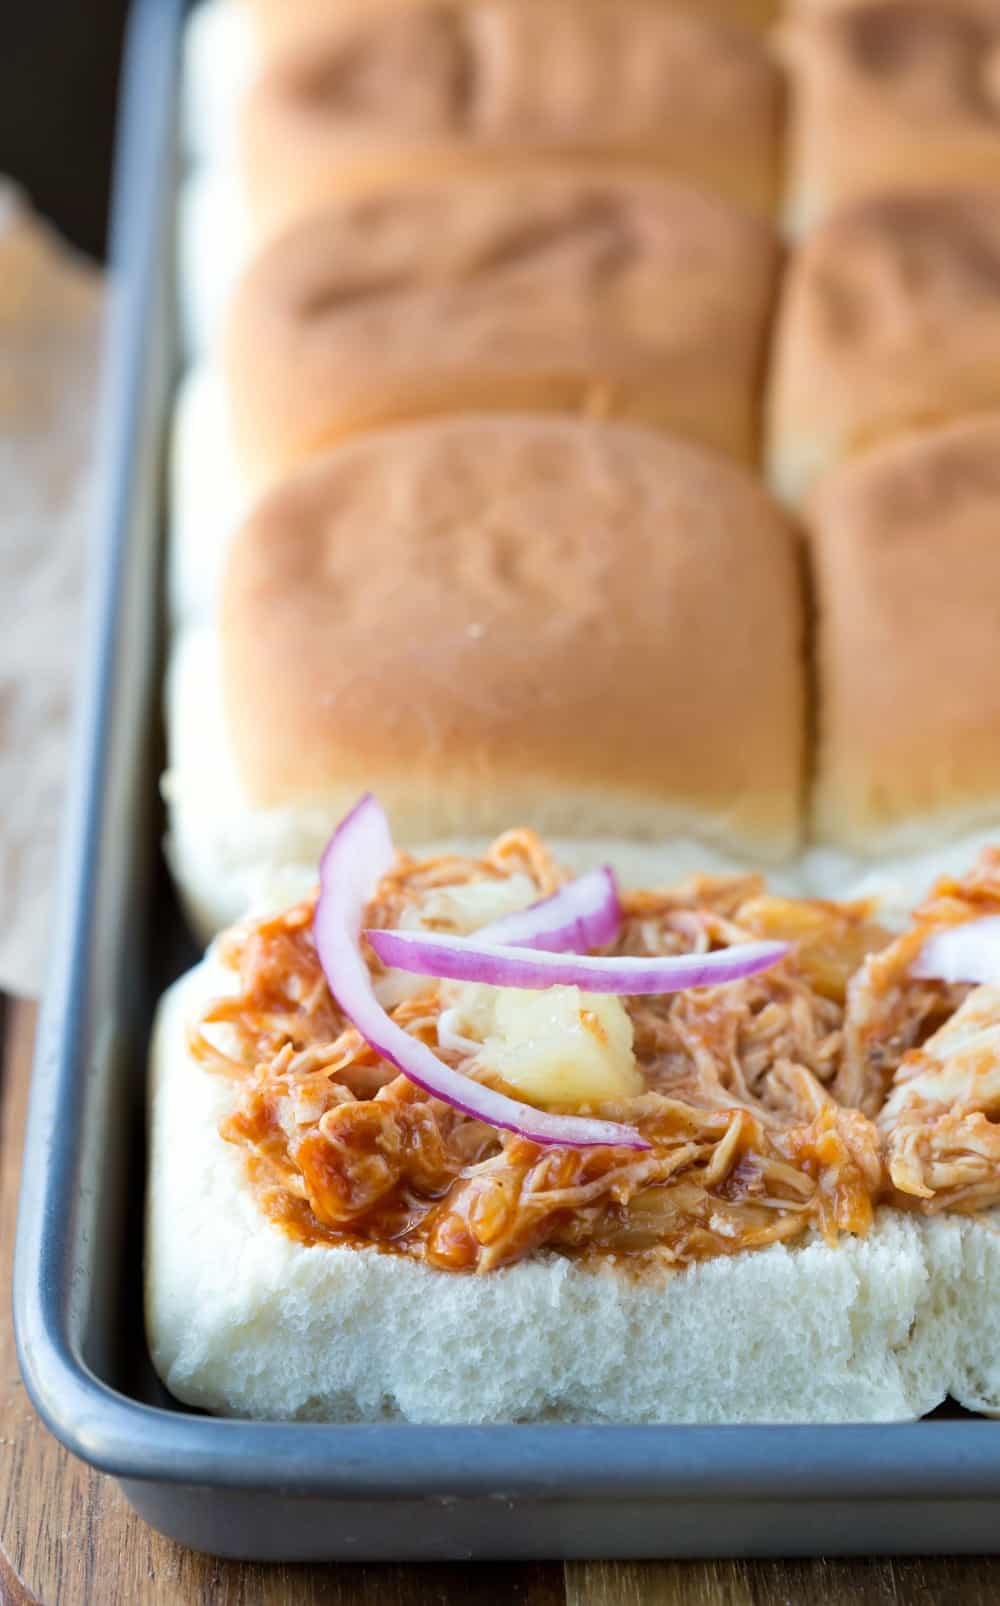 Baked Hawaiian Barbecue Chicken Sandwiches